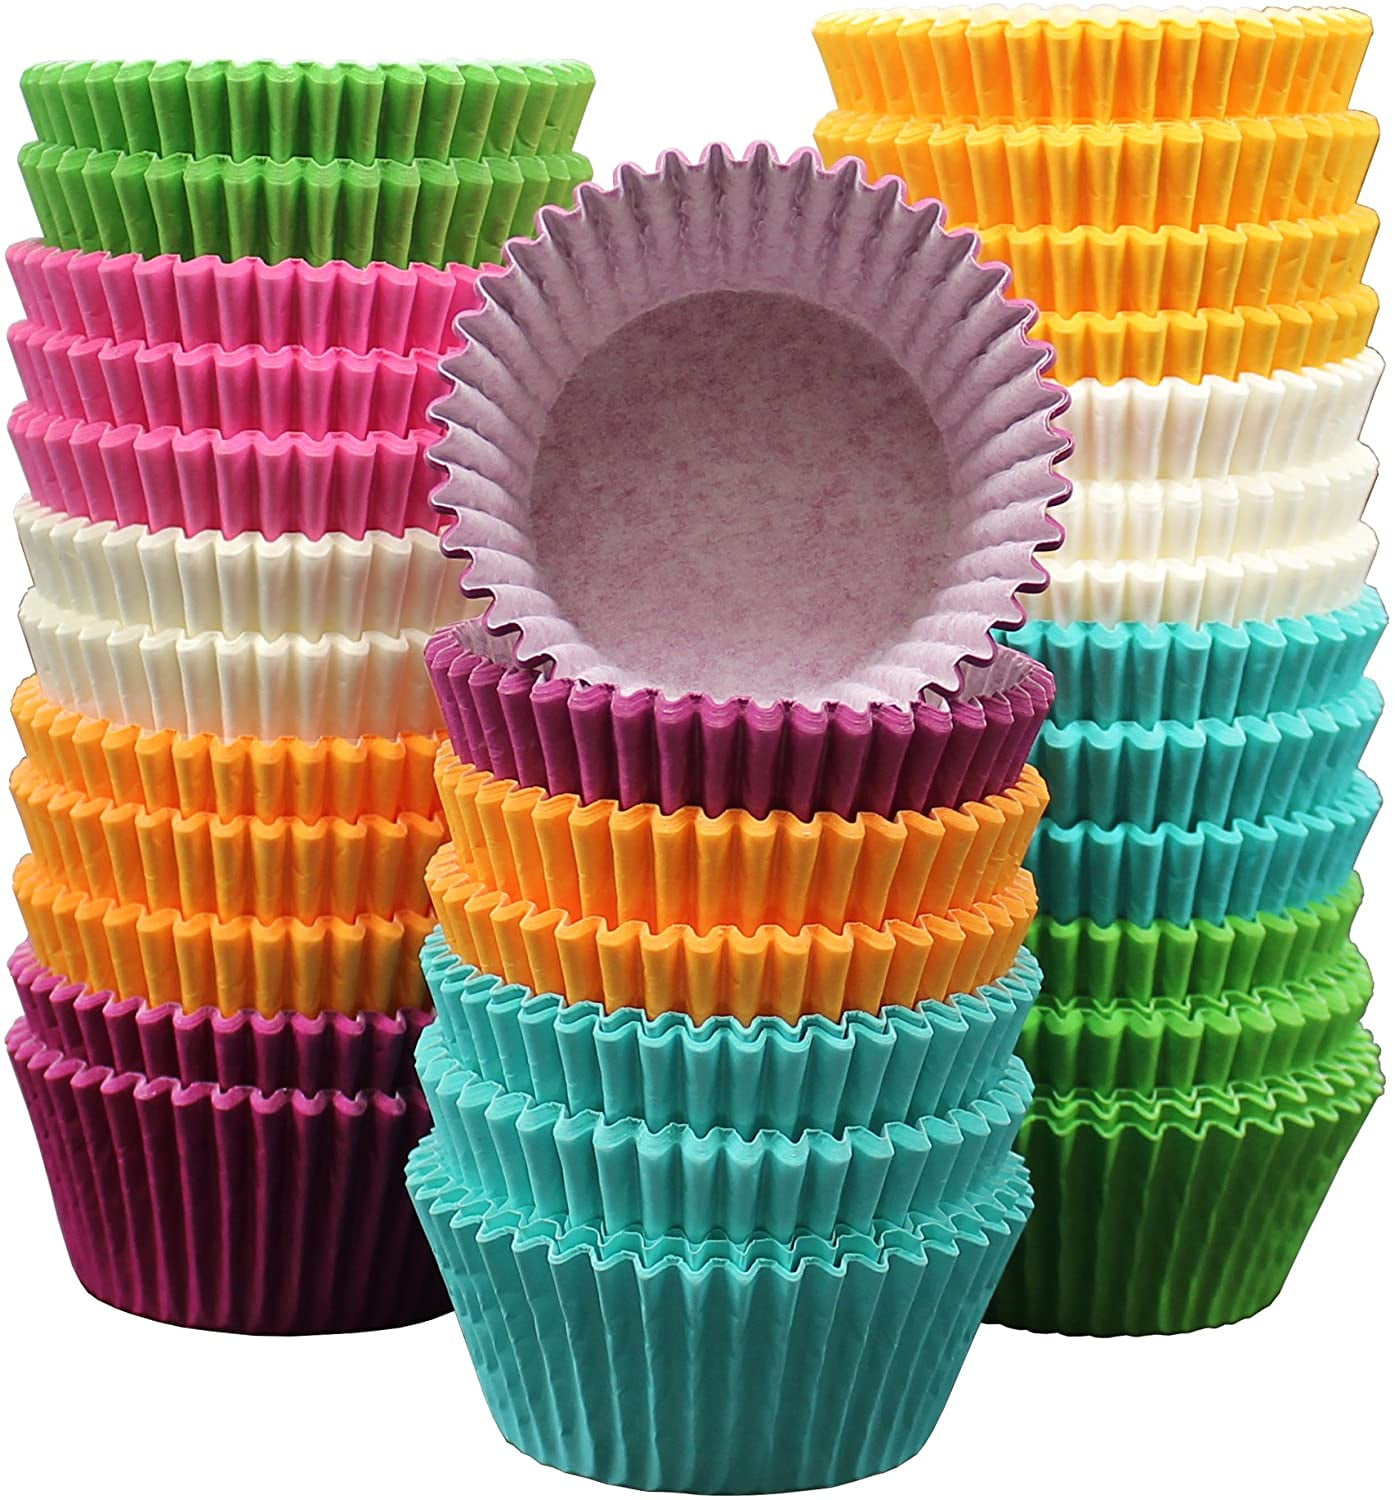 12pcs Silicone Soft Cake Muffin Chocolate Cupcake Bakeware Baking Cup Mould MP 